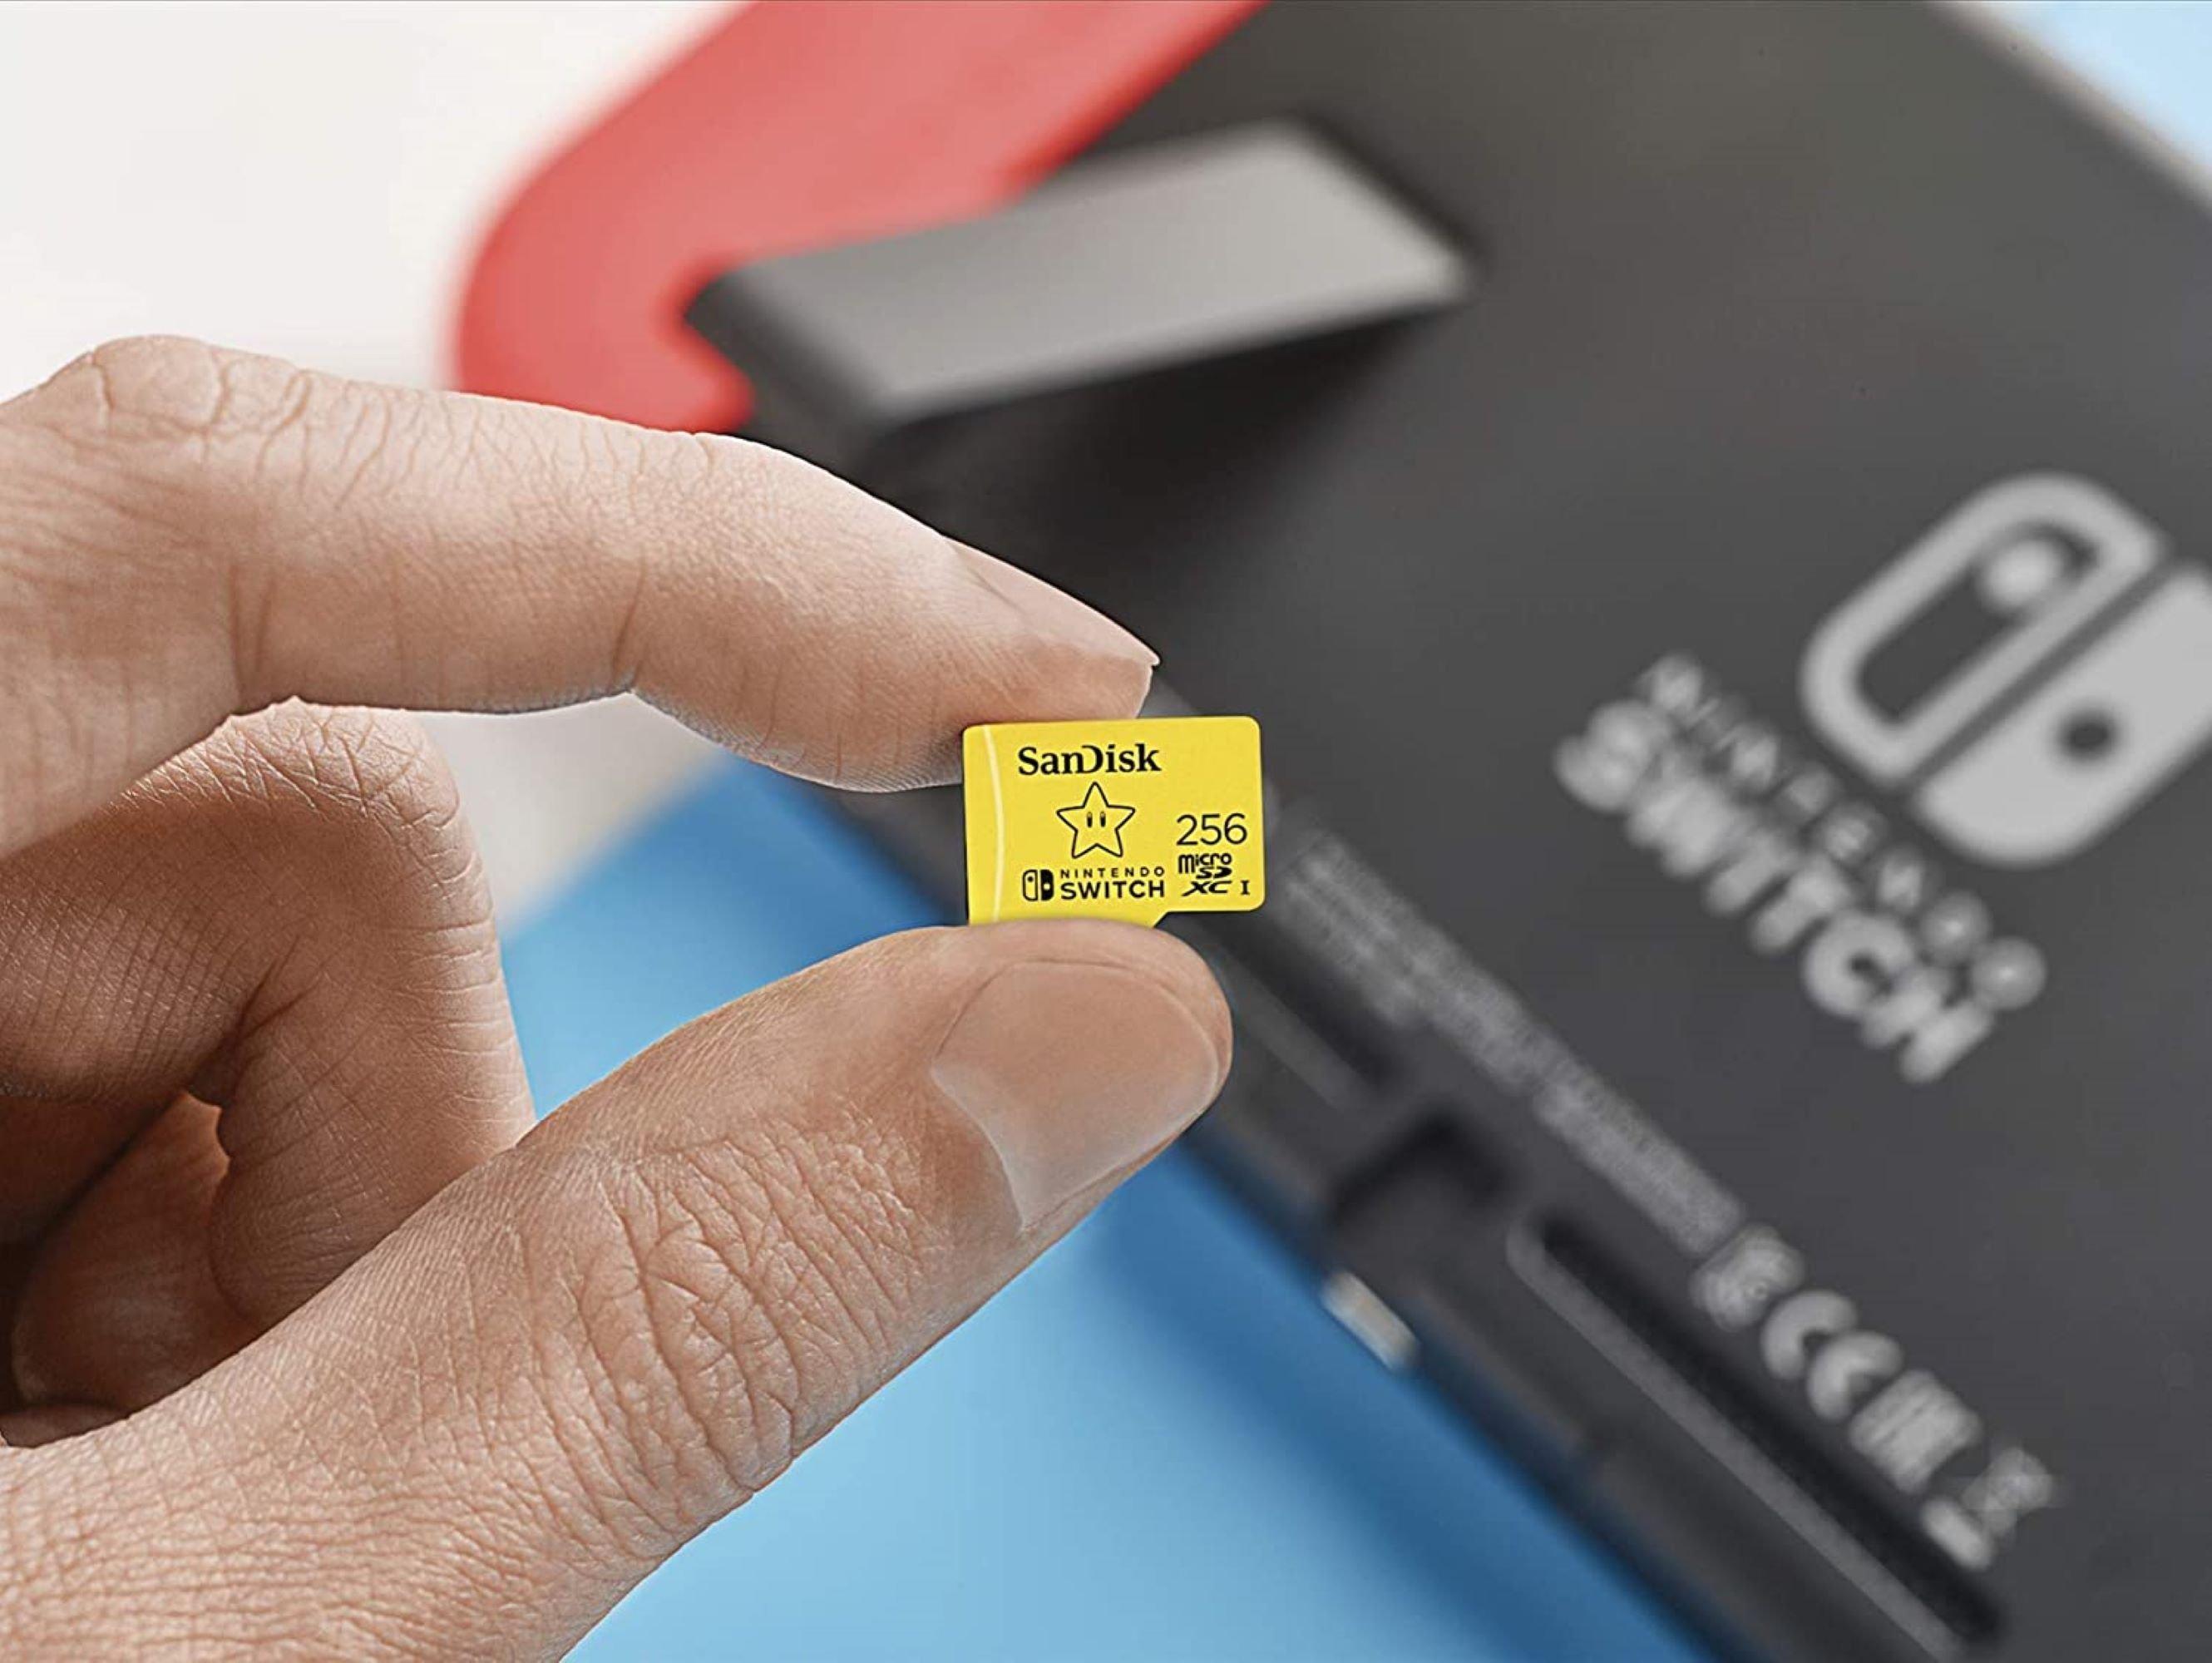 How do you choose the right Nintendo Switch memory card